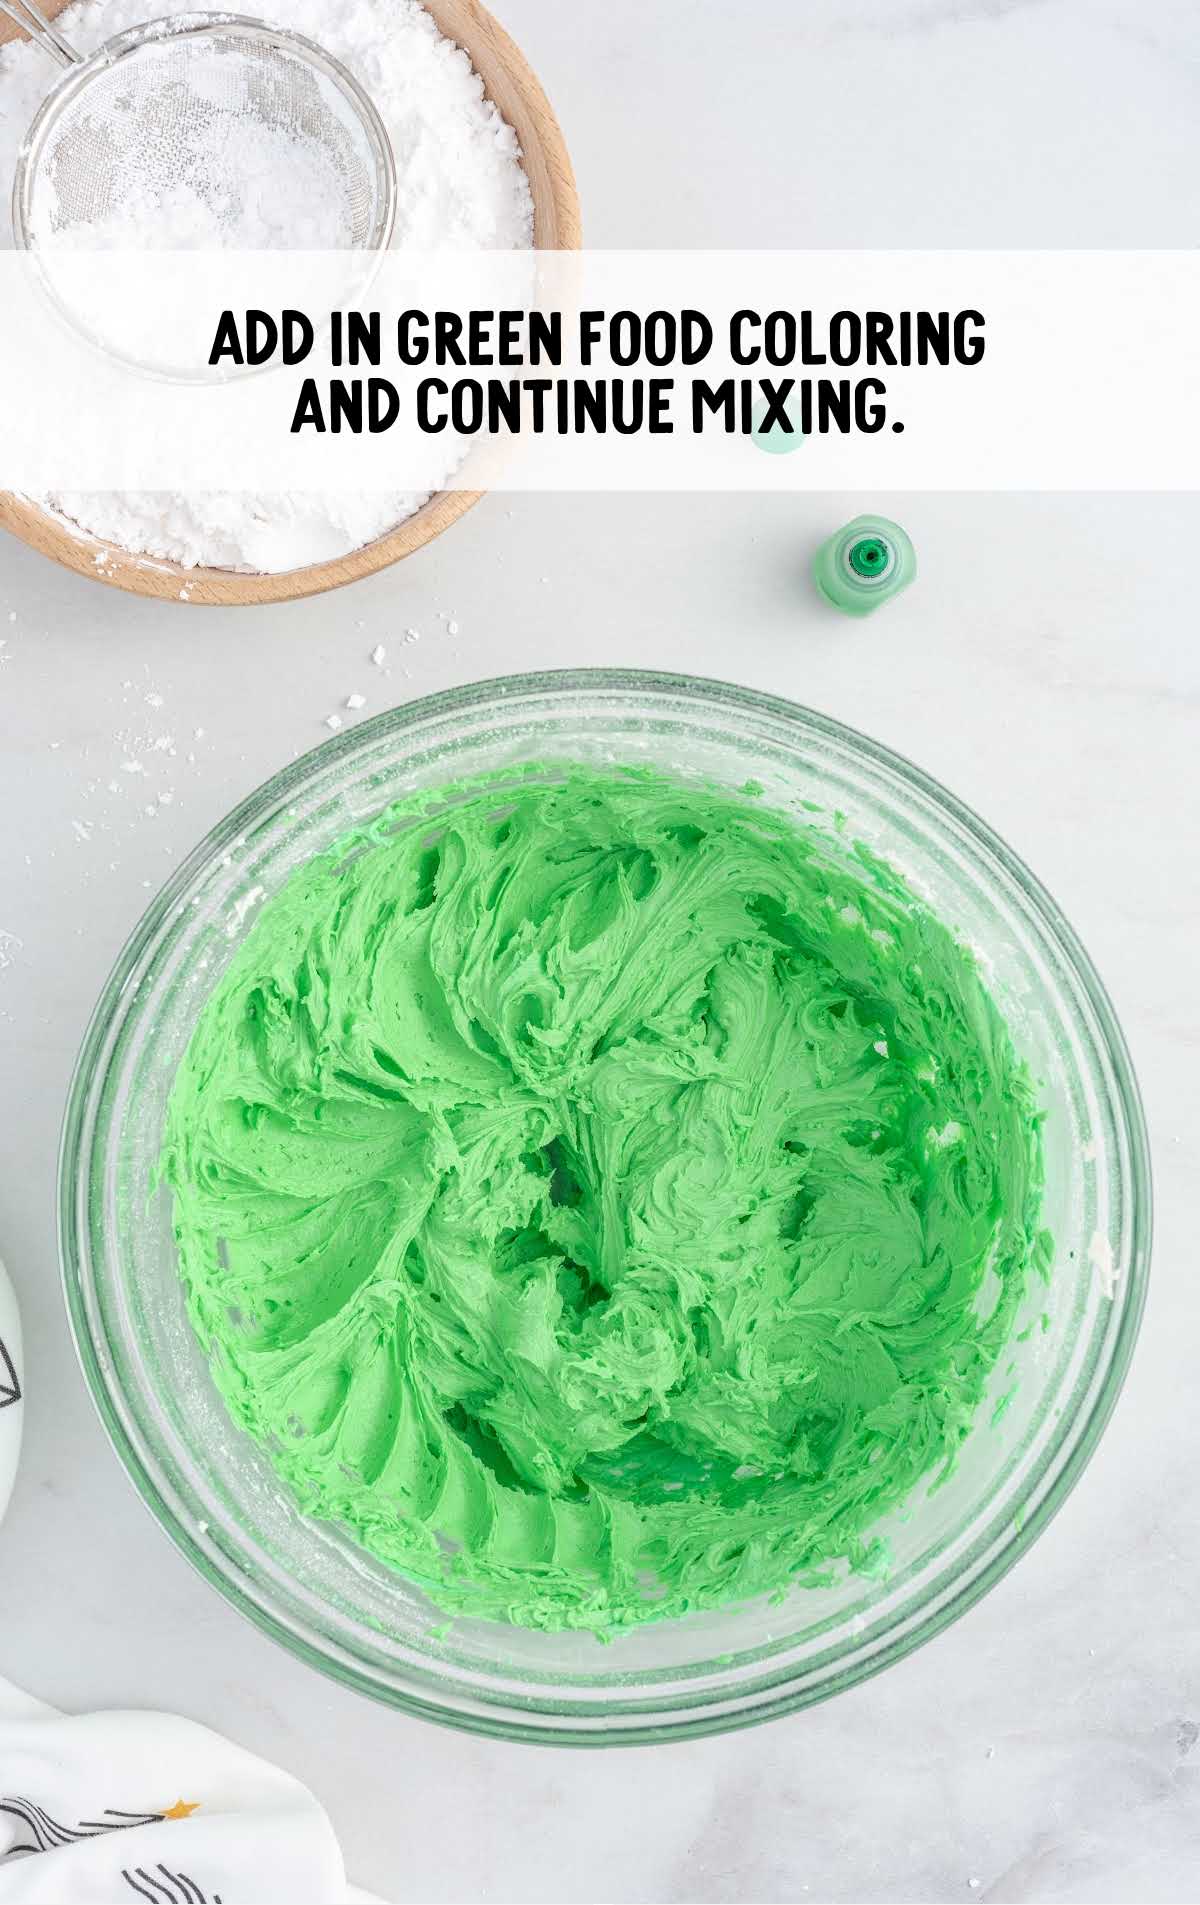 green coloring added to the vanilla mixture in a bowl